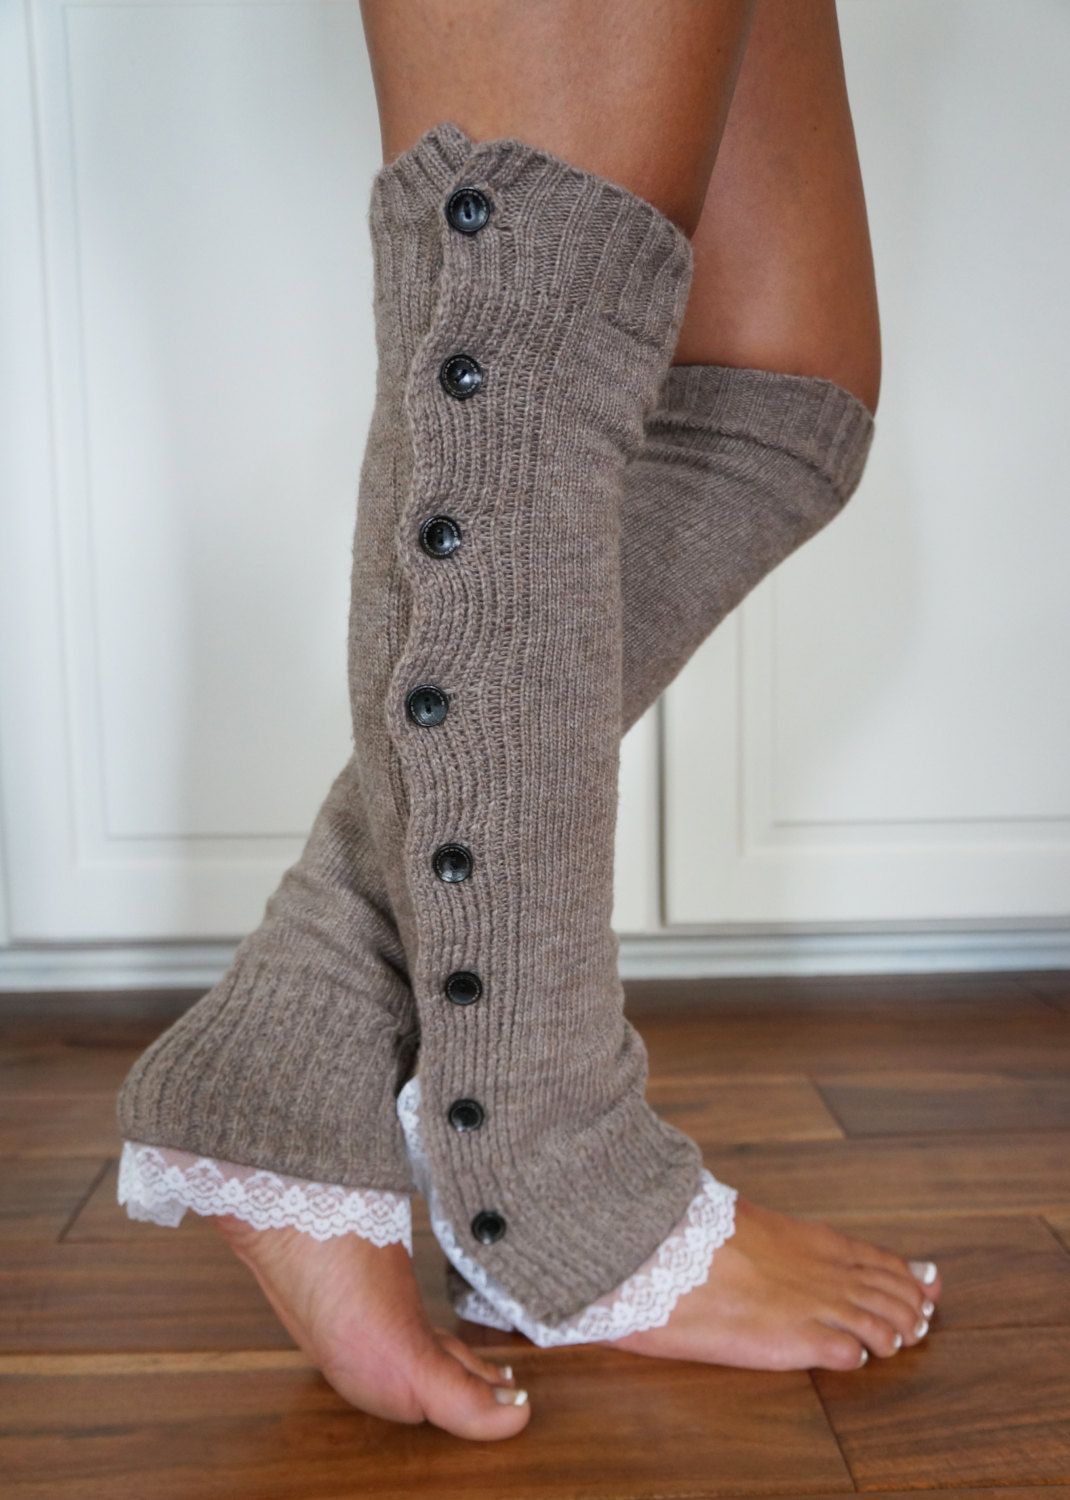 Boot Cozies: Lace and Button Leg Warmers and Boot Socks by BoottiqueInc on Etsy